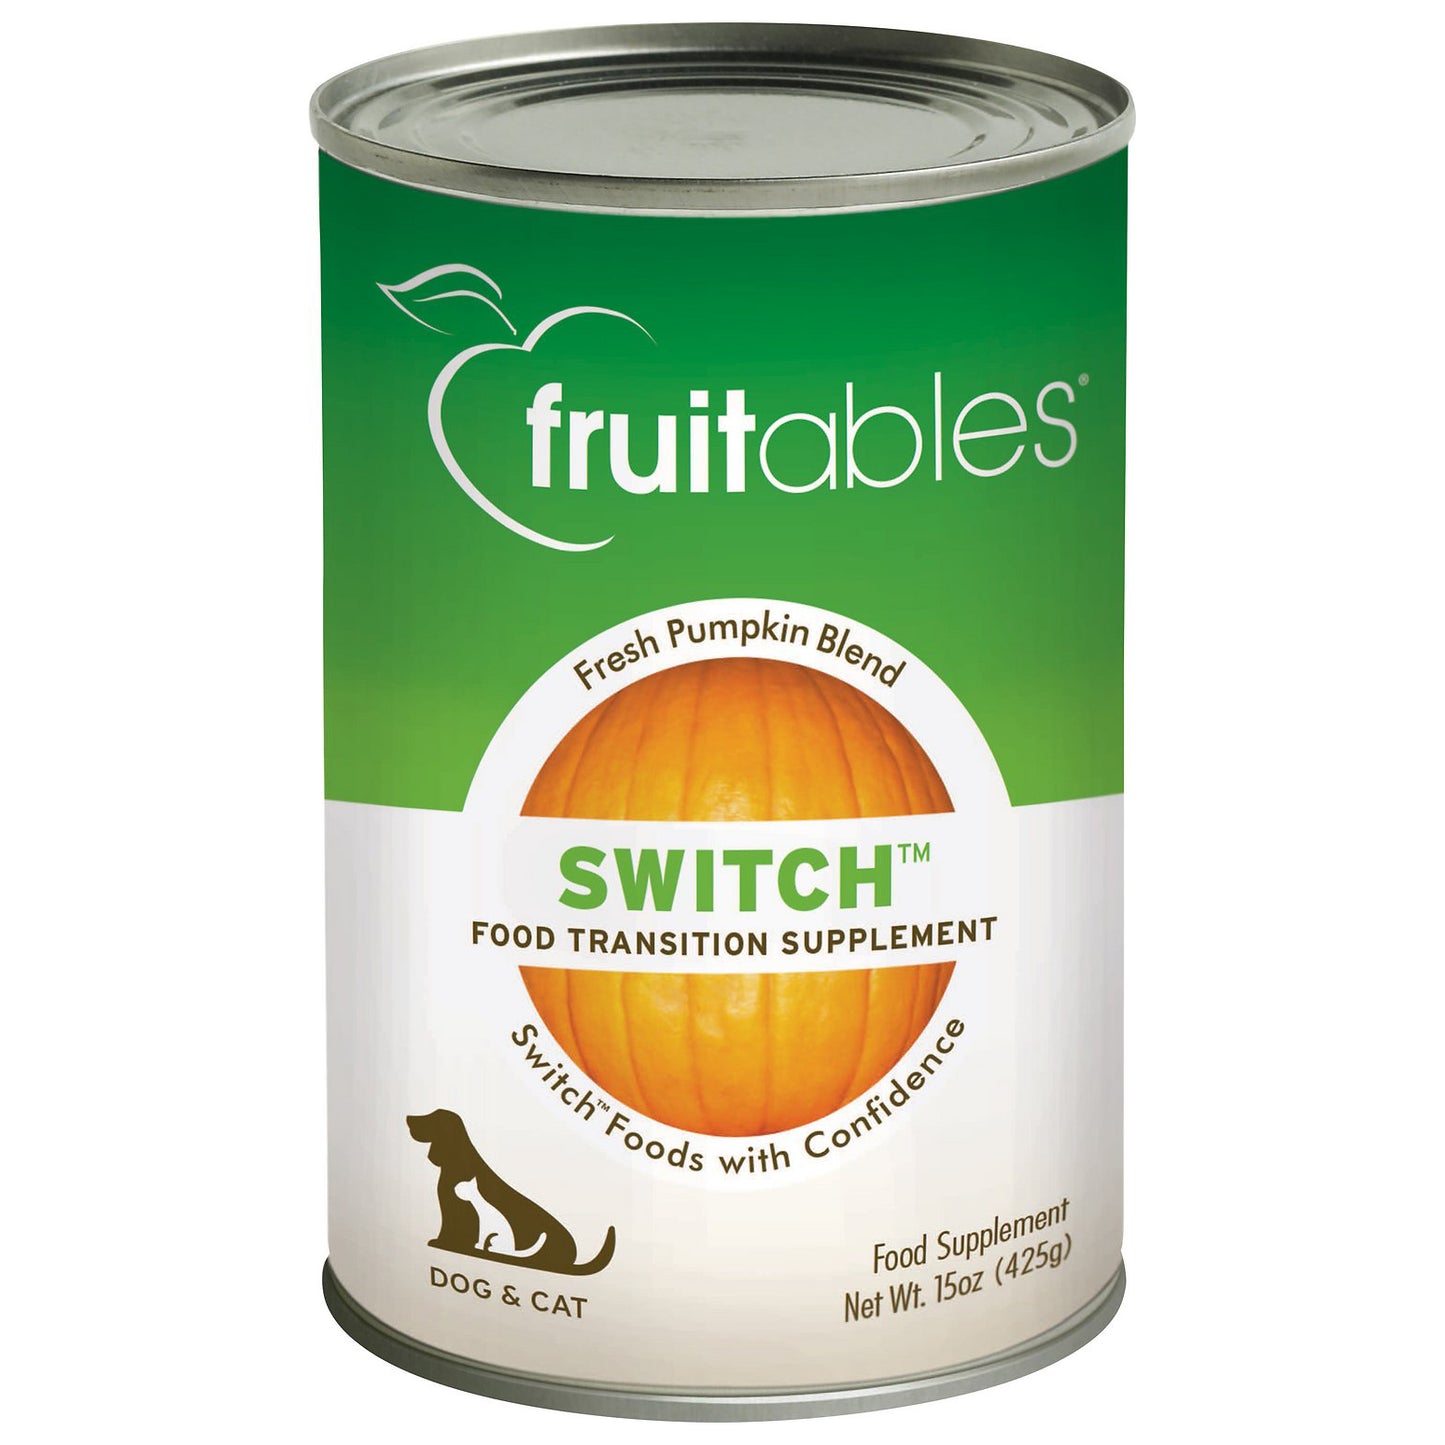 Fruitables Switch Food Transition Supplement Canned Dog Food  Image